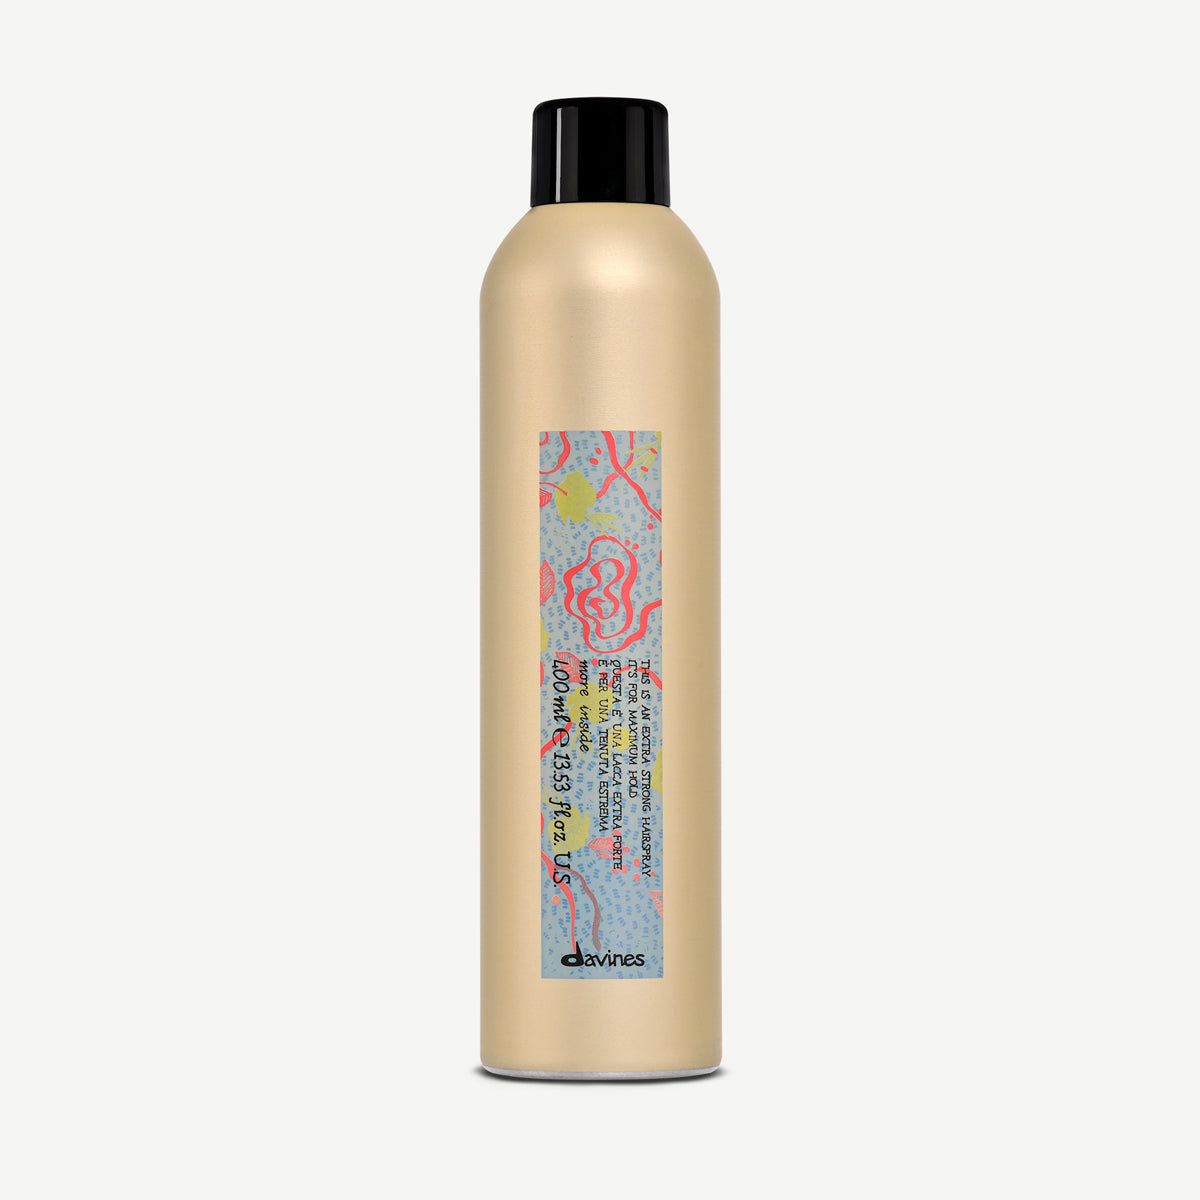 This Is An Extra Strong Hairspray 1  400 mlDavines
